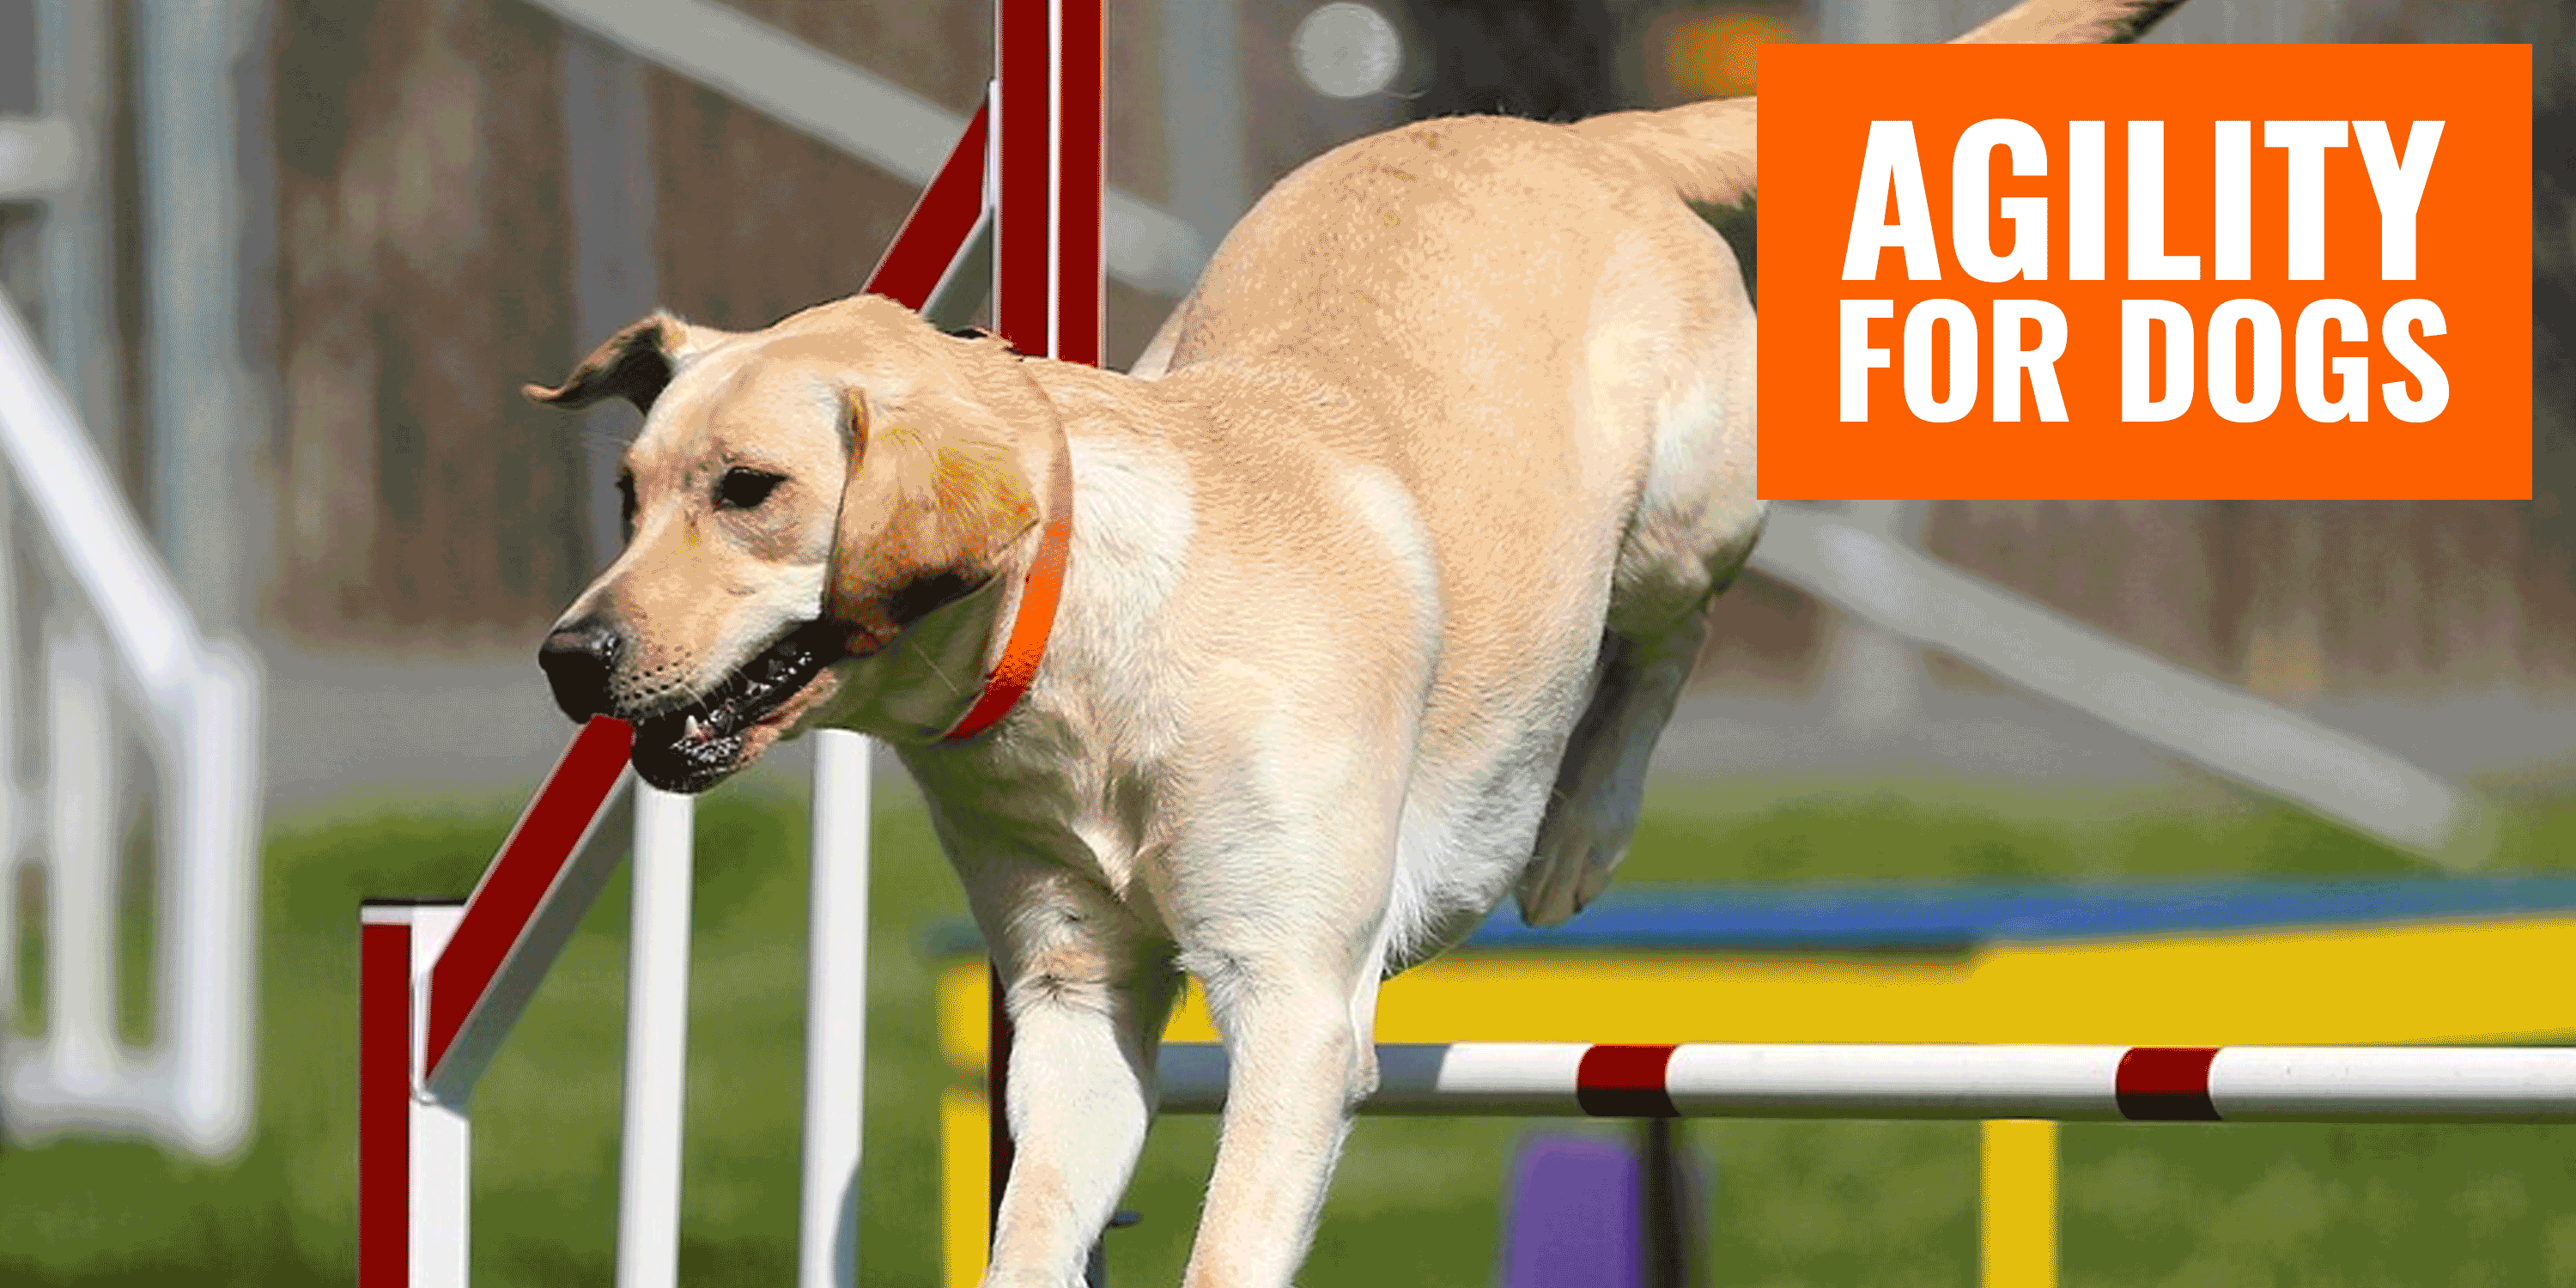 Agility Equipment for Dogs — Indoors, Outdoors, Gears, Training, Reviews